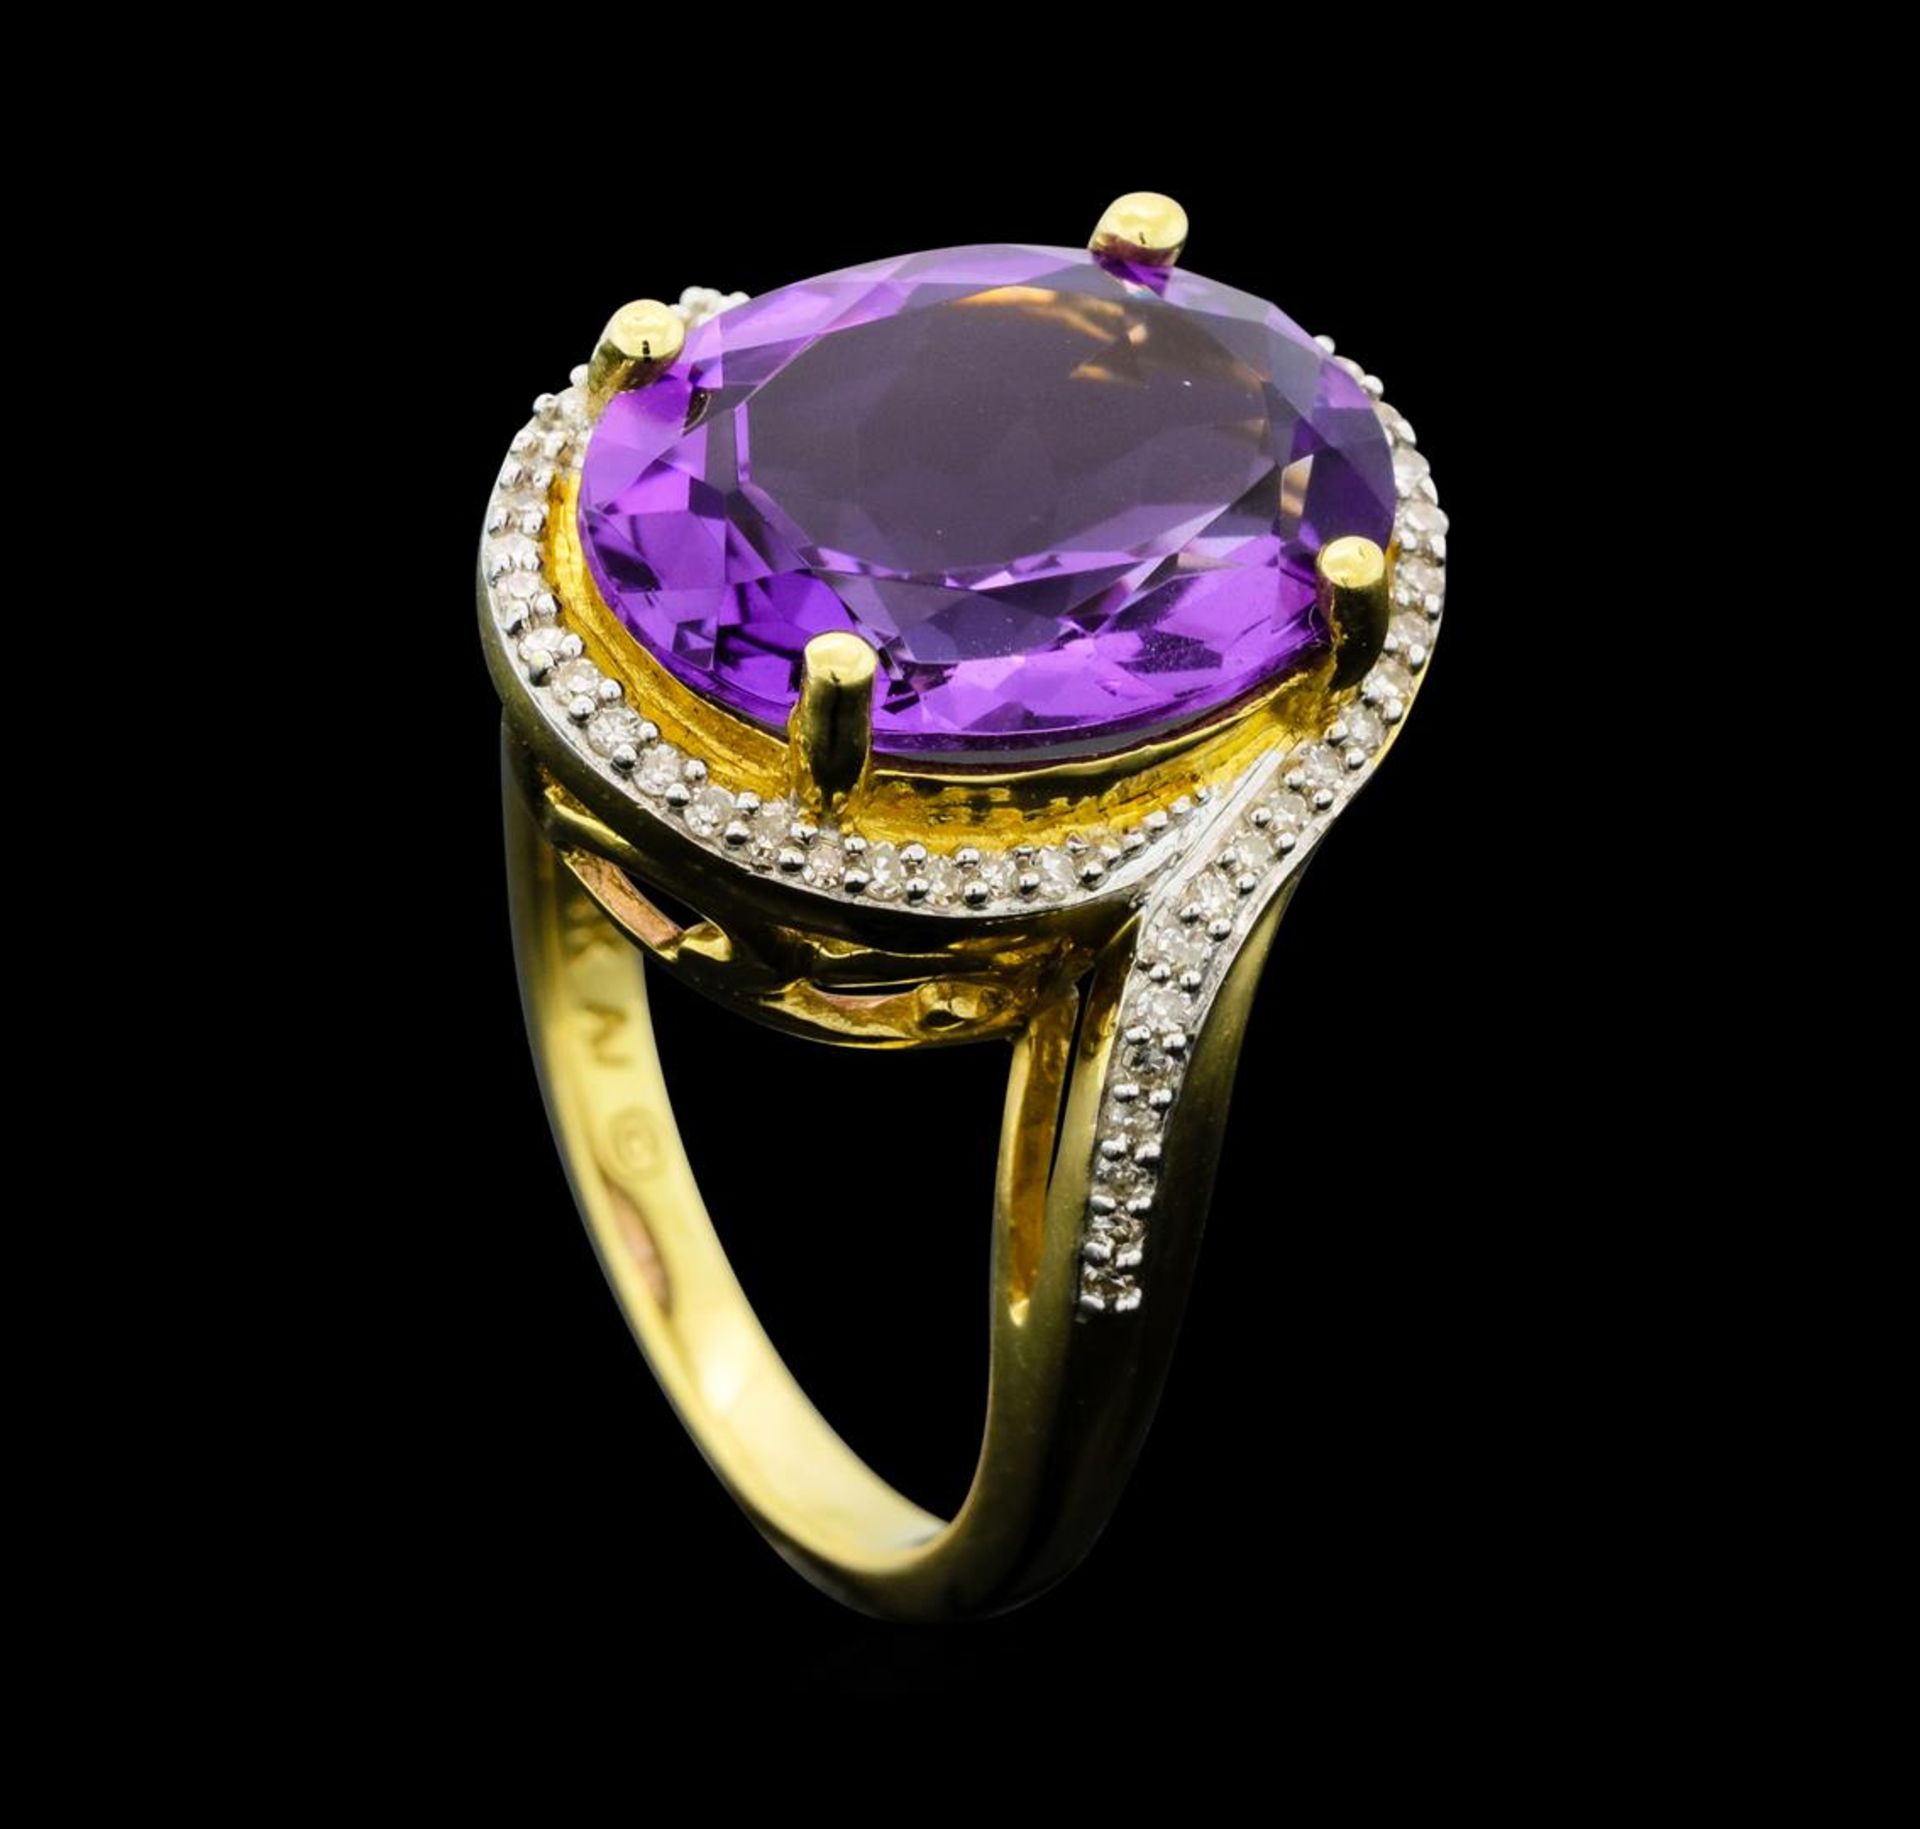 4.90 ctw Amethyst And Diamond Ring - 14KT Yellow Gold - Image 4 of 5